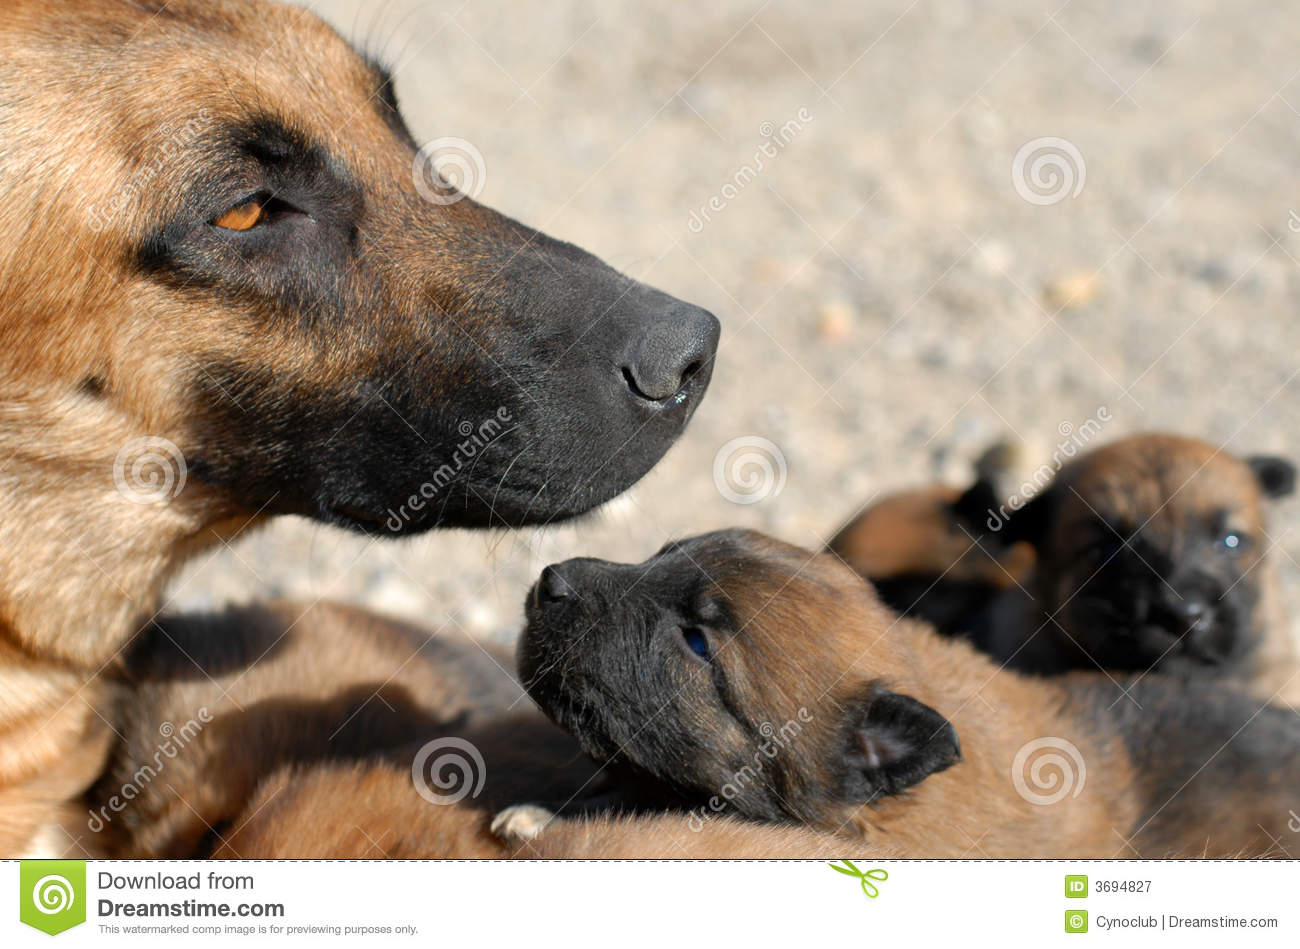 Mother Dog And Puppies Royalty Free Stock Photography   Image  3694827